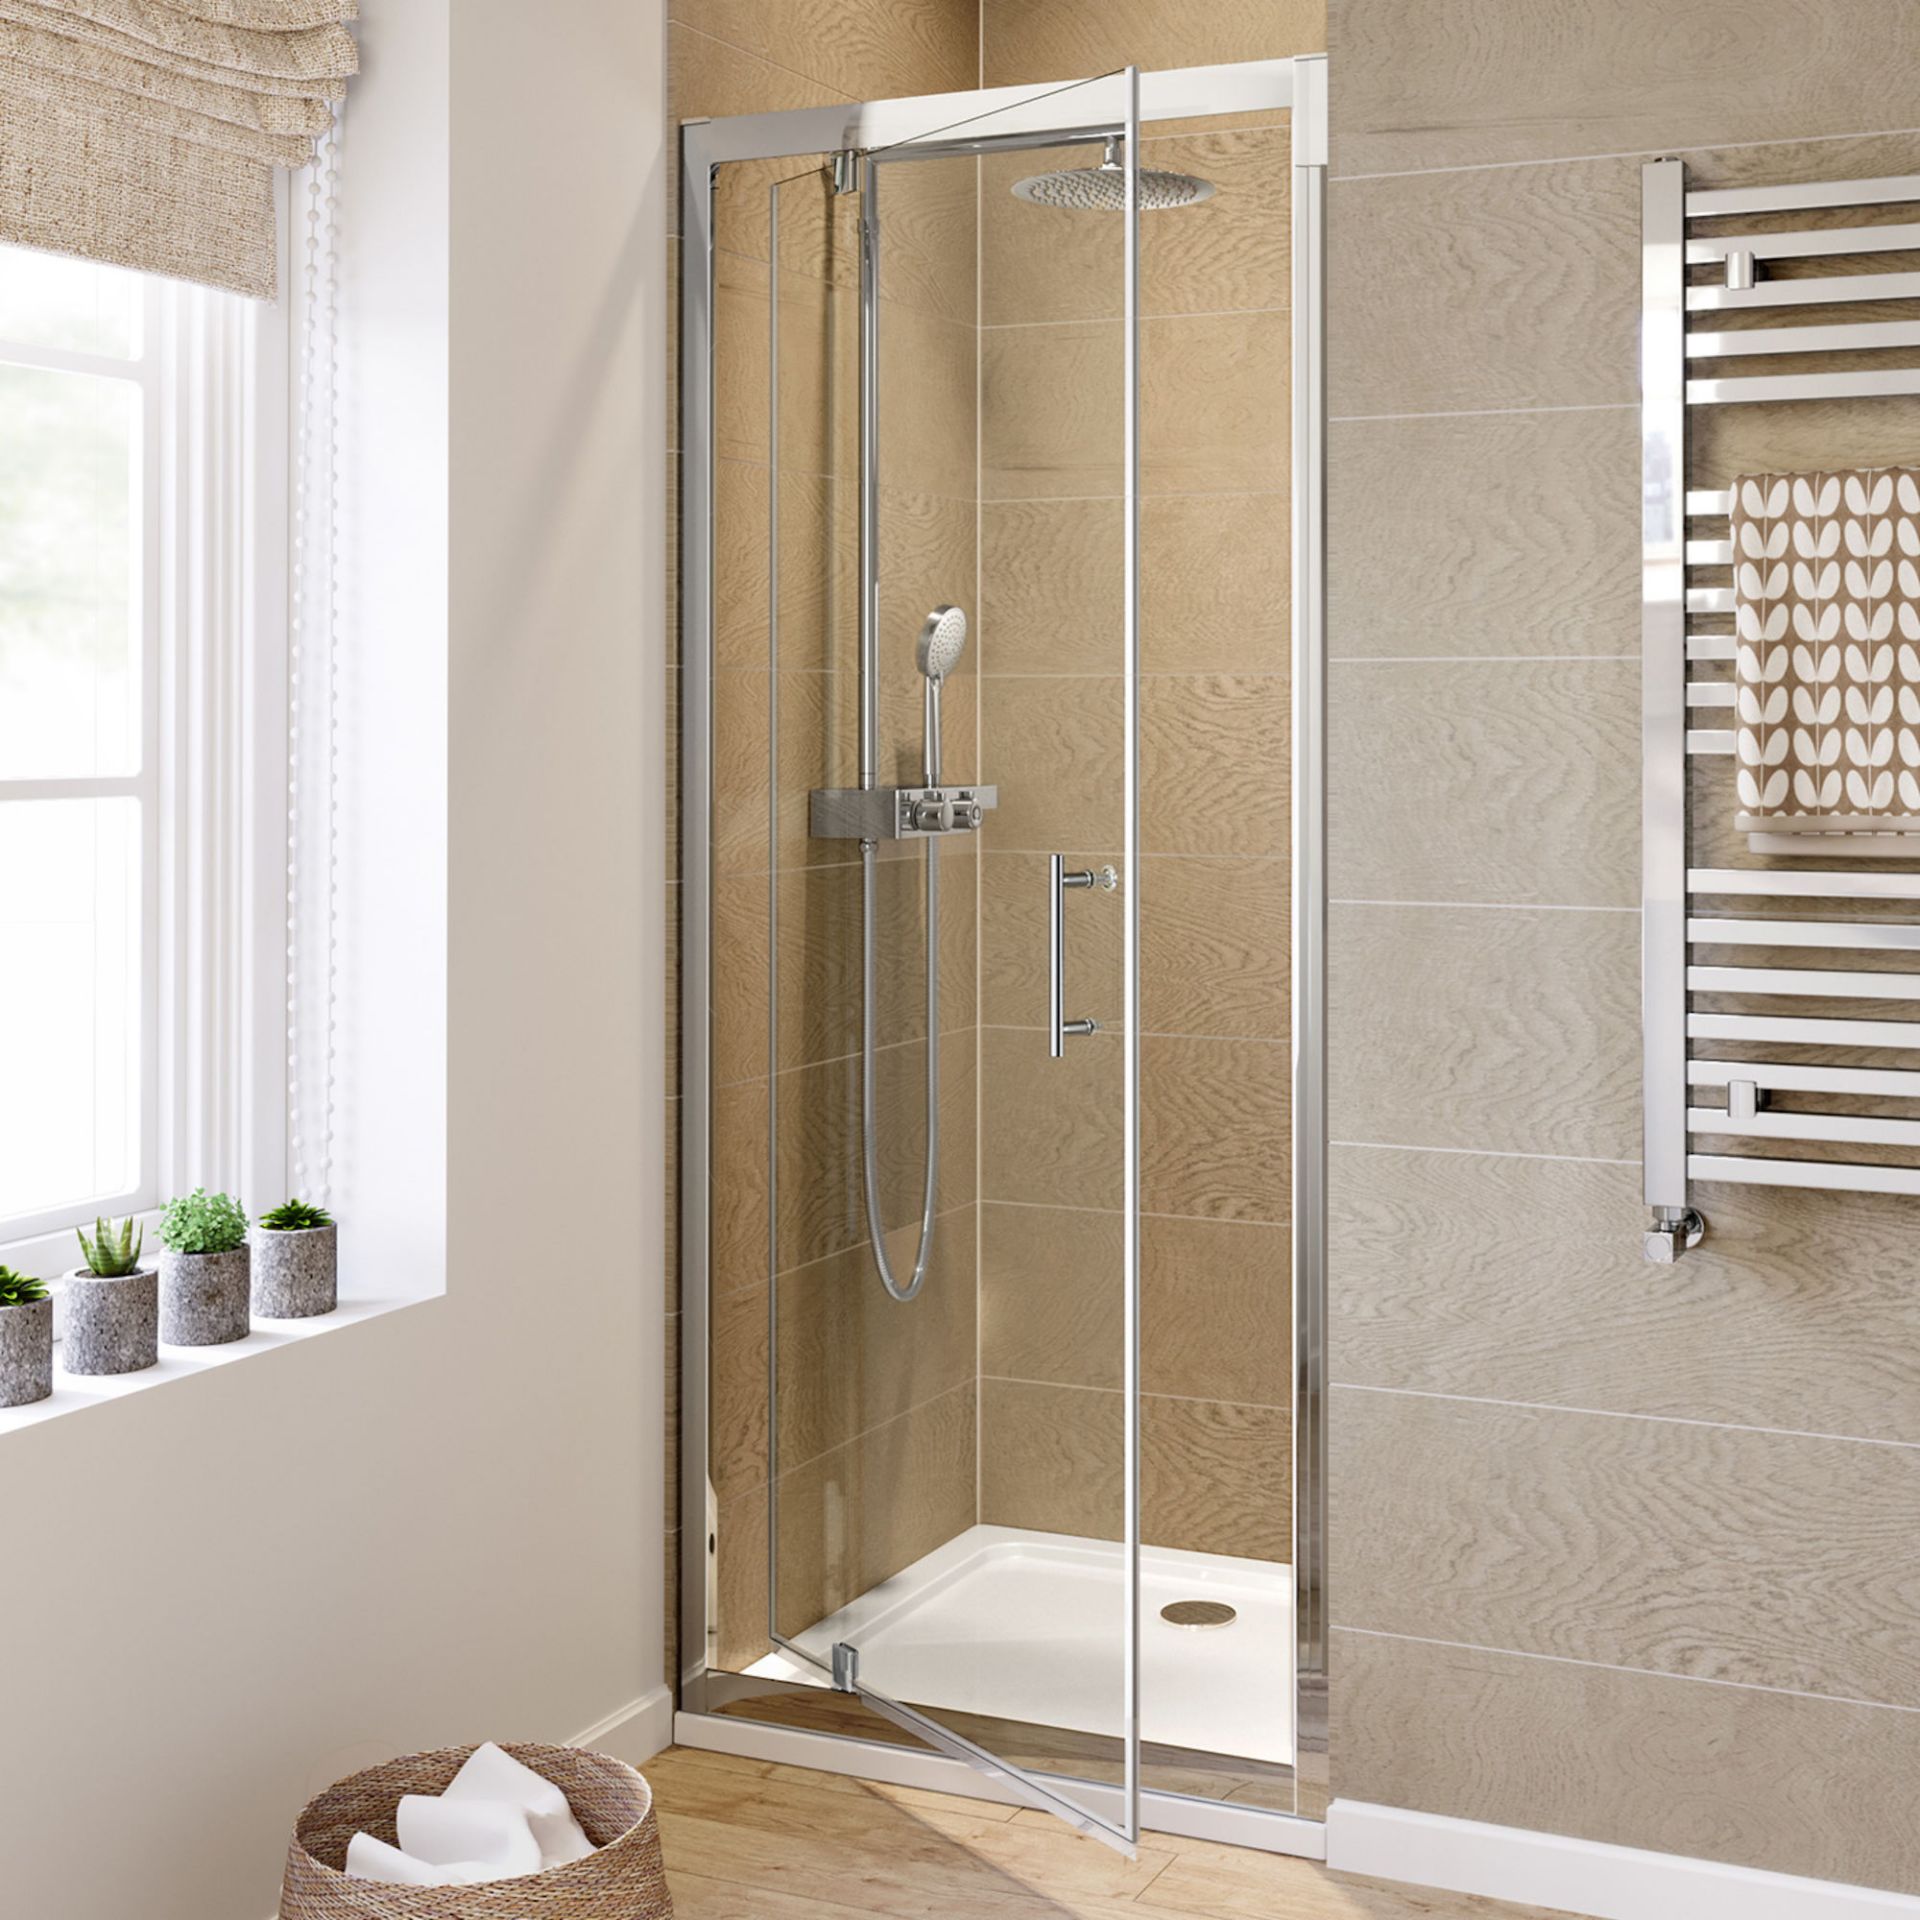 (HP28) 900mm - 6mm - Elements Pivot Shower Door. RRP £299.99. 6mm Safety Glass Fully waterproof